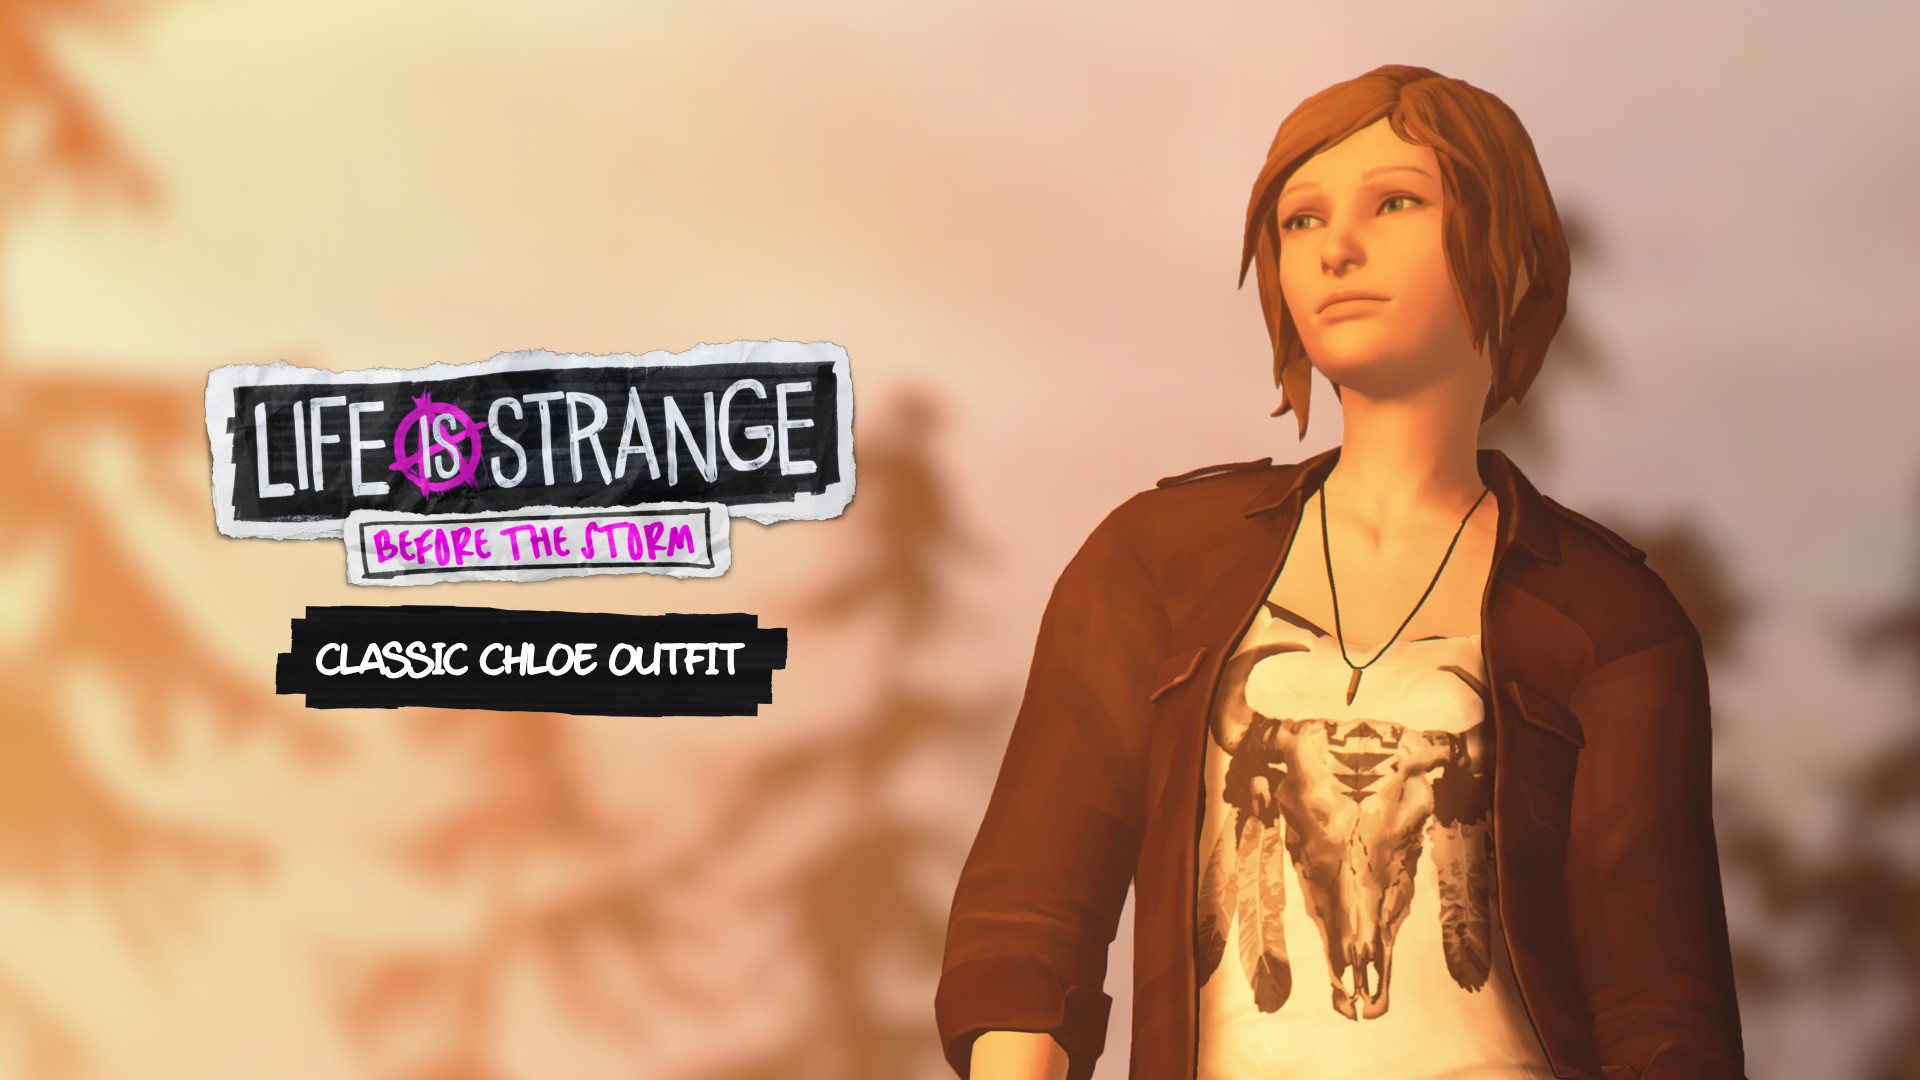 Life is Strange: Before the Storm - Classic Chloe Outfit Pack DLC XBOX One CD Key, 0.89$